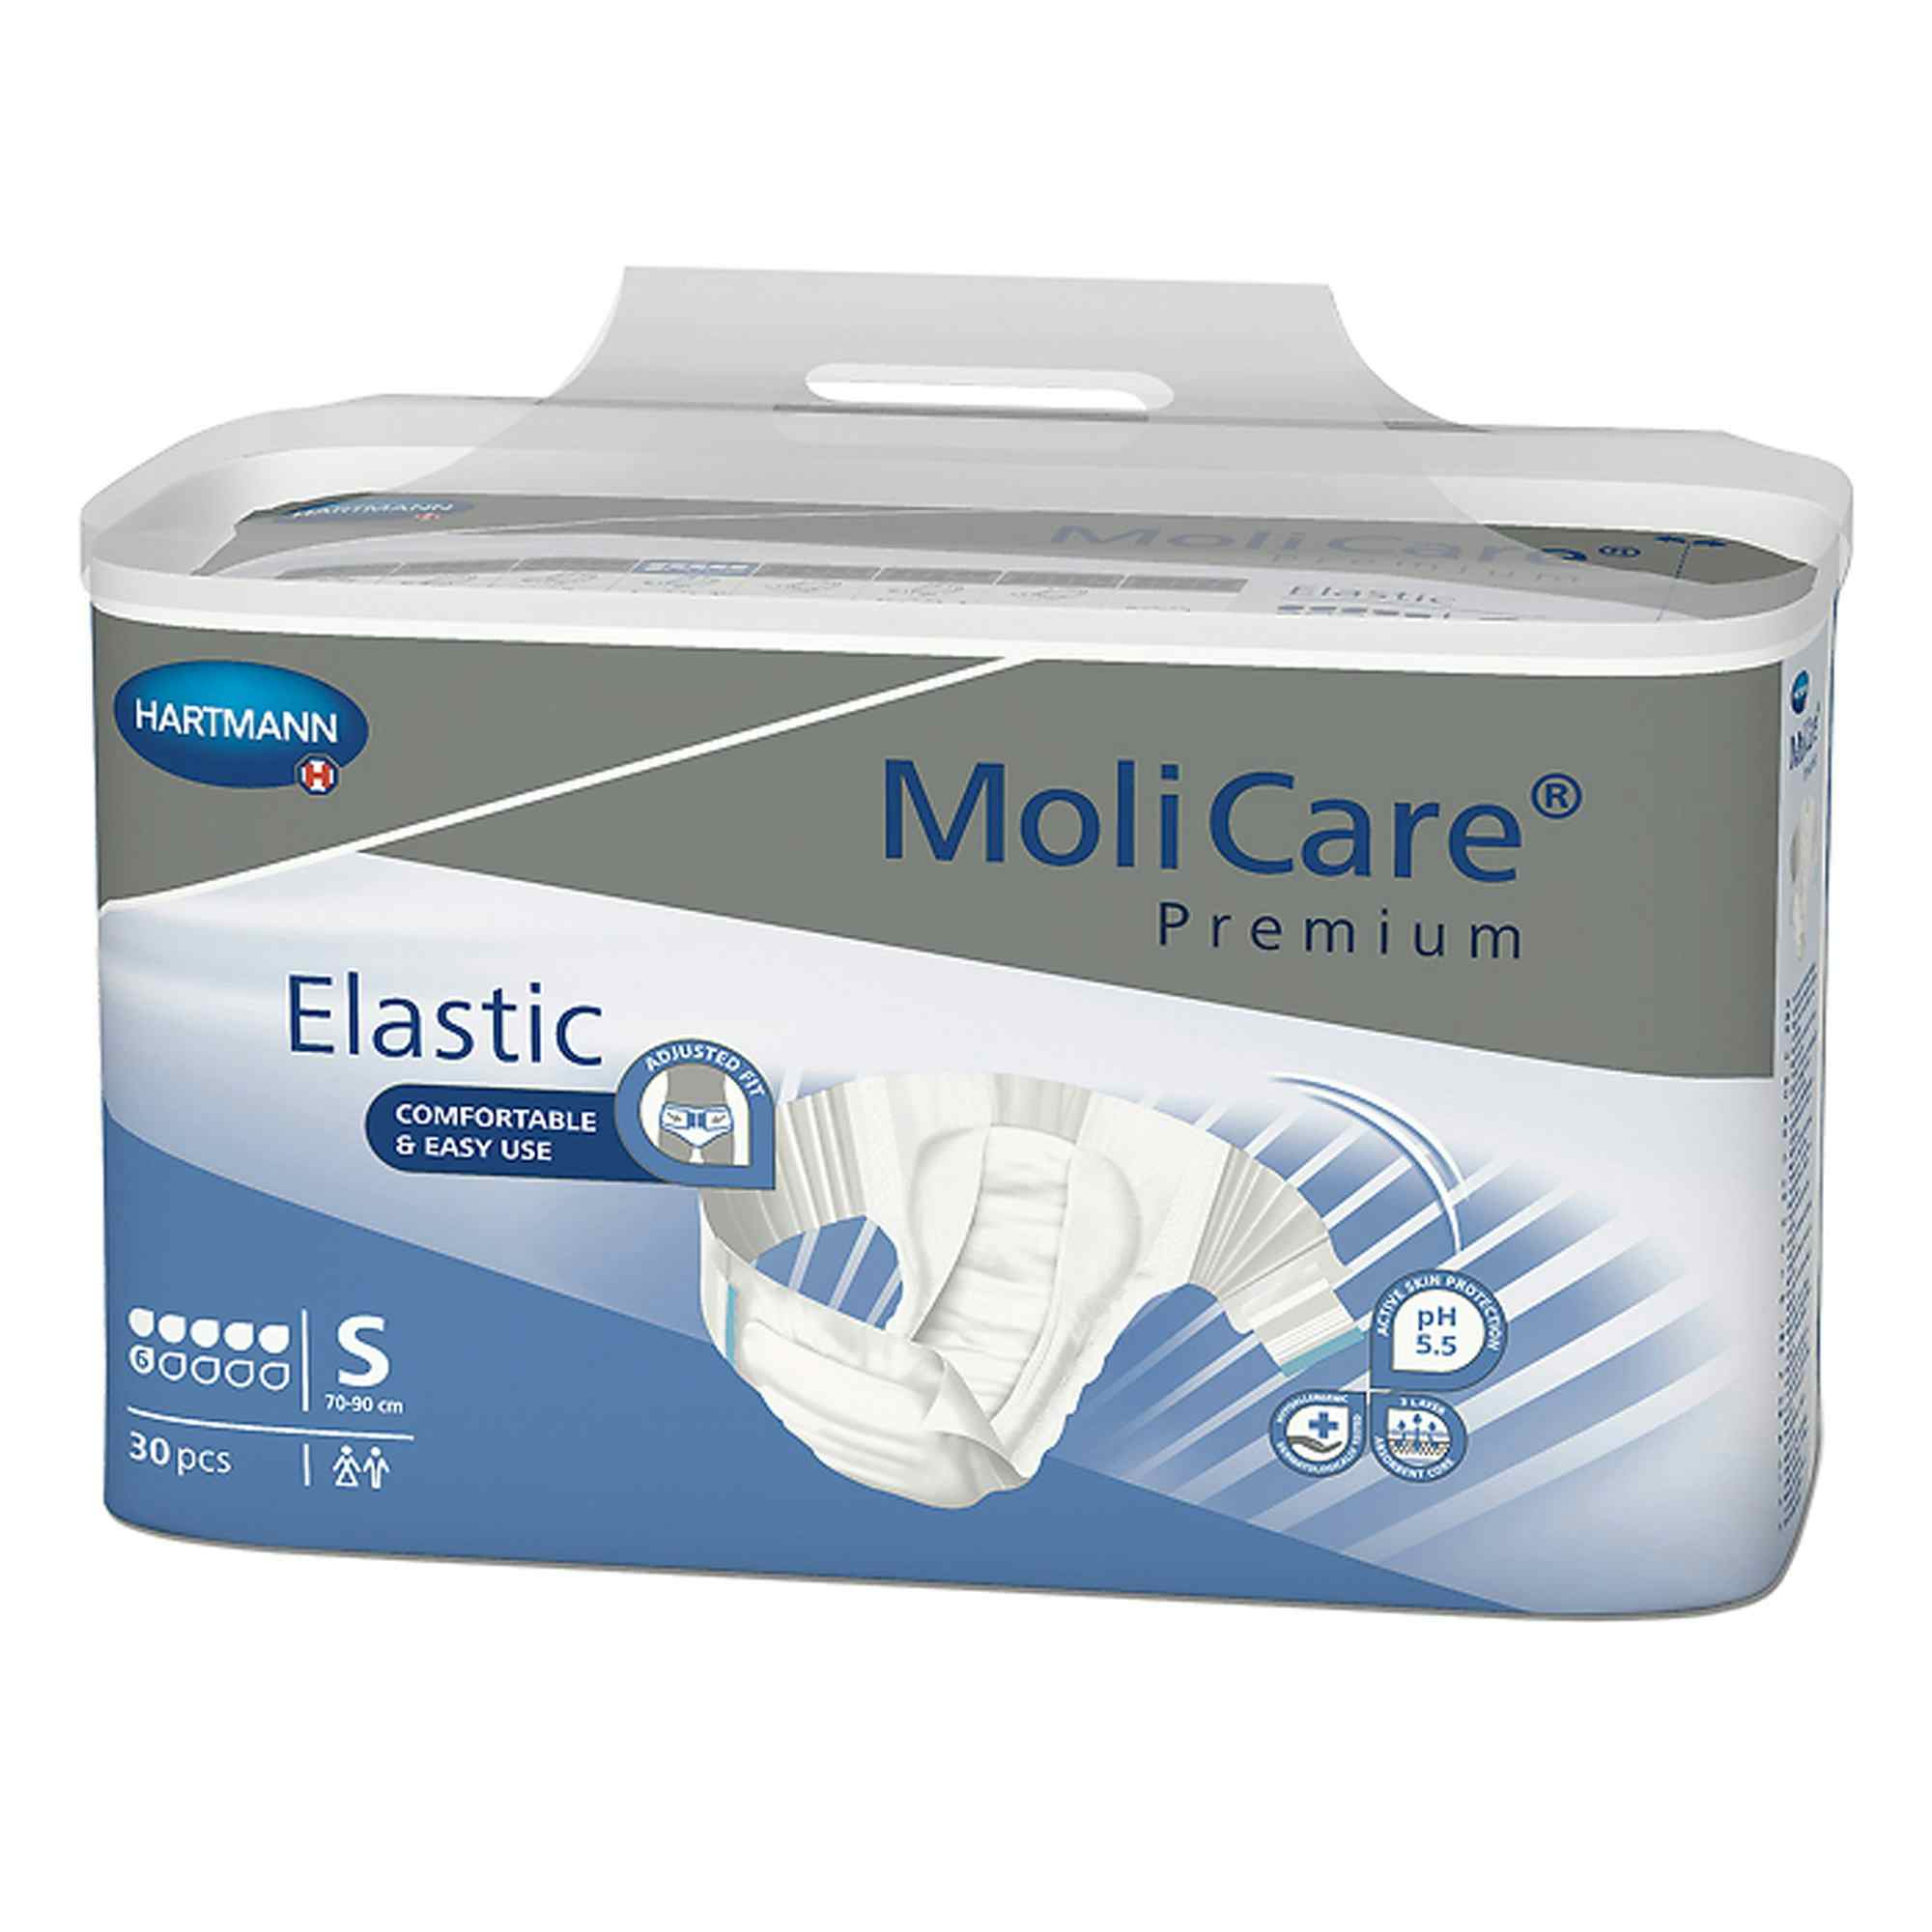 MoliCare Premium Elastic 6D Disposable Brief Adult Diapers with Tabs, Moderate Absorbency, 165271, Small (27-35") - Bag of 30